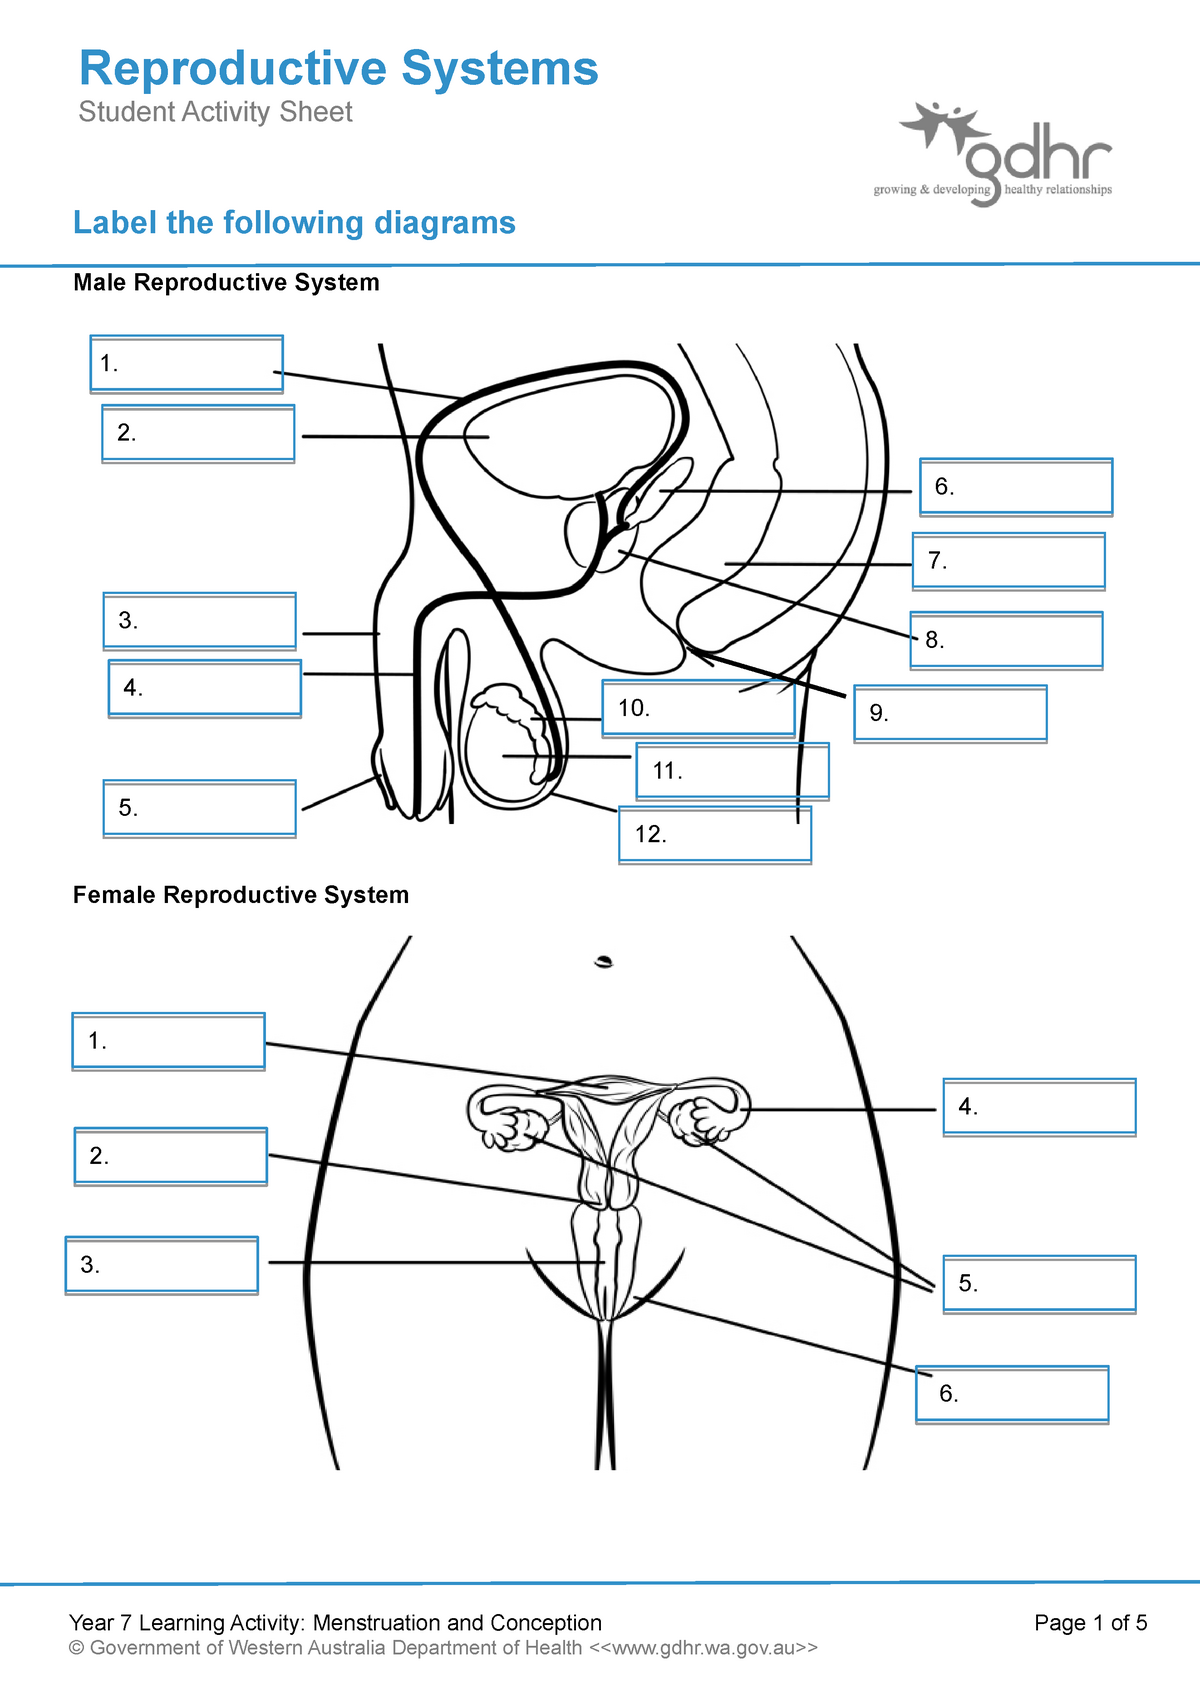 2 1 Reproductive Systems Student Worksheet Label The Following Diagrams Male Reproductive 